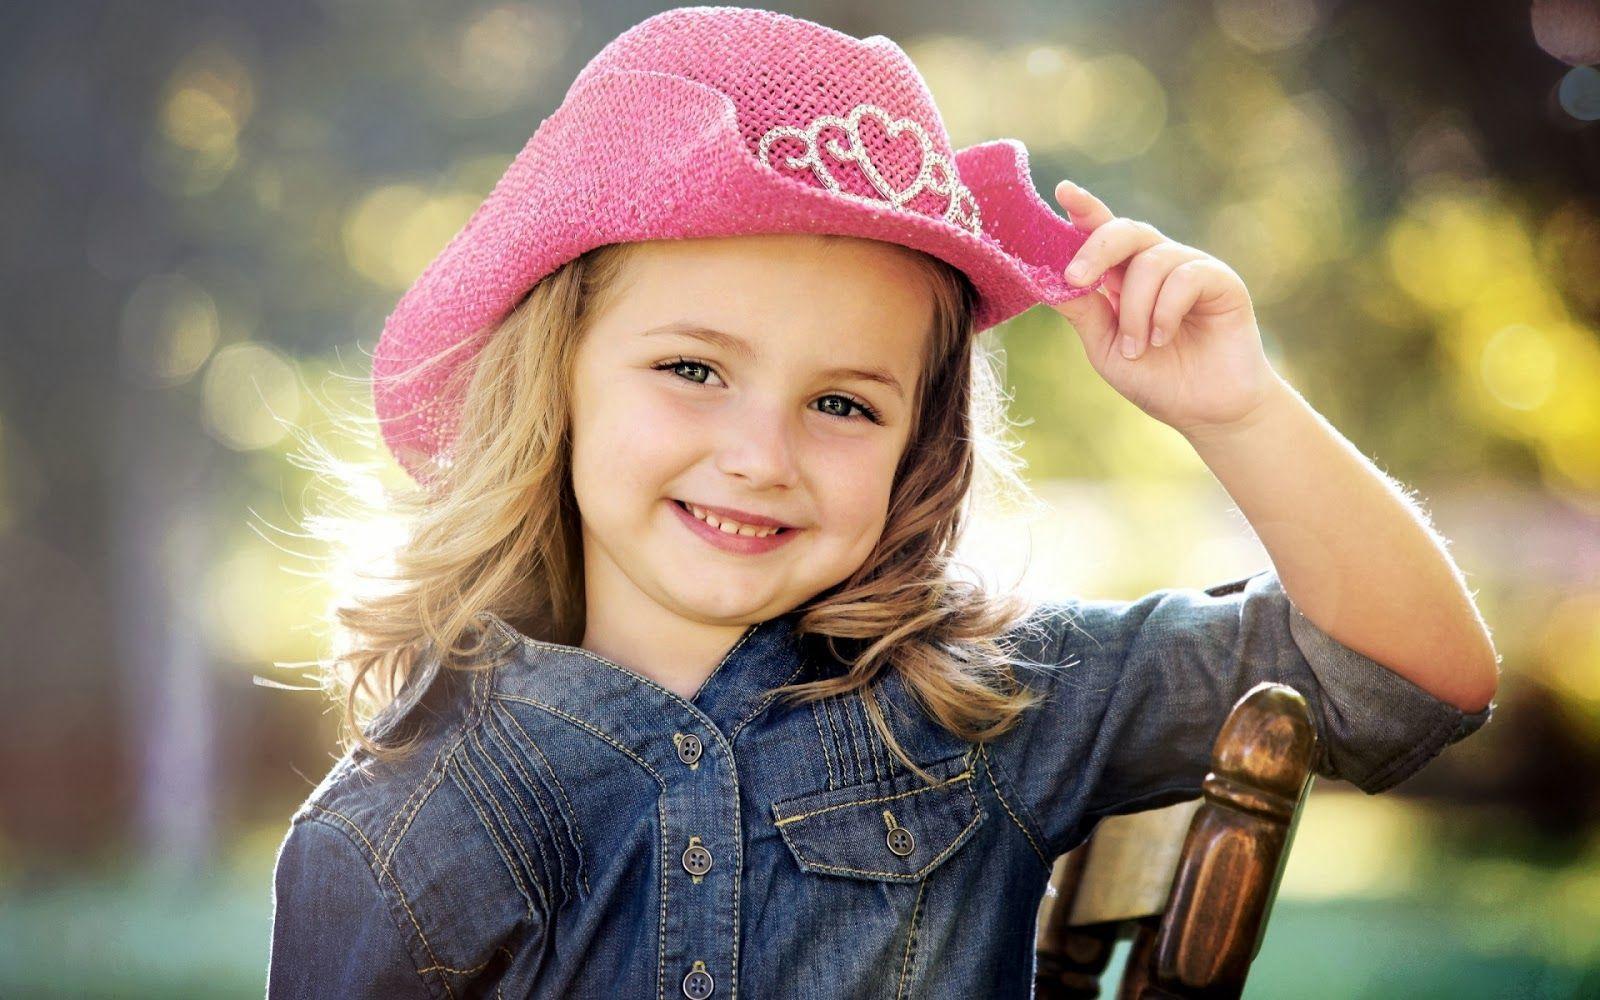 Adorable Little Girl Wallpapers - Wallpaper Cave